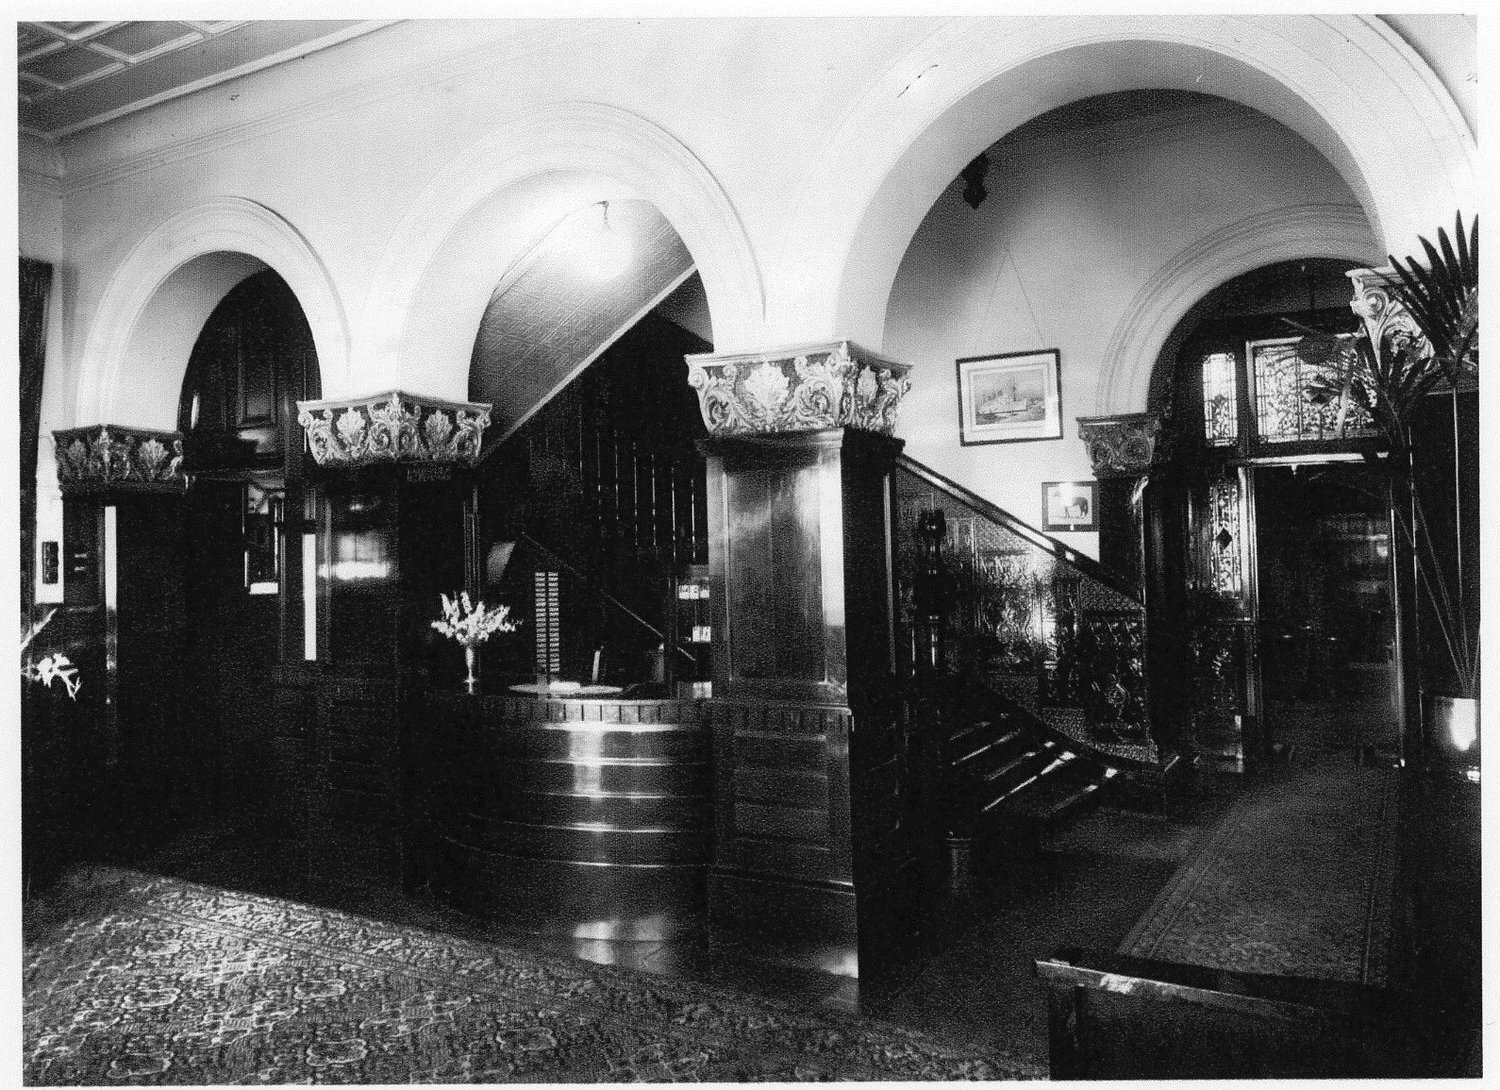  FOYER AND STAIRCASE, 1934  Image courtesy of State Library of Western Australia: 102463PD 